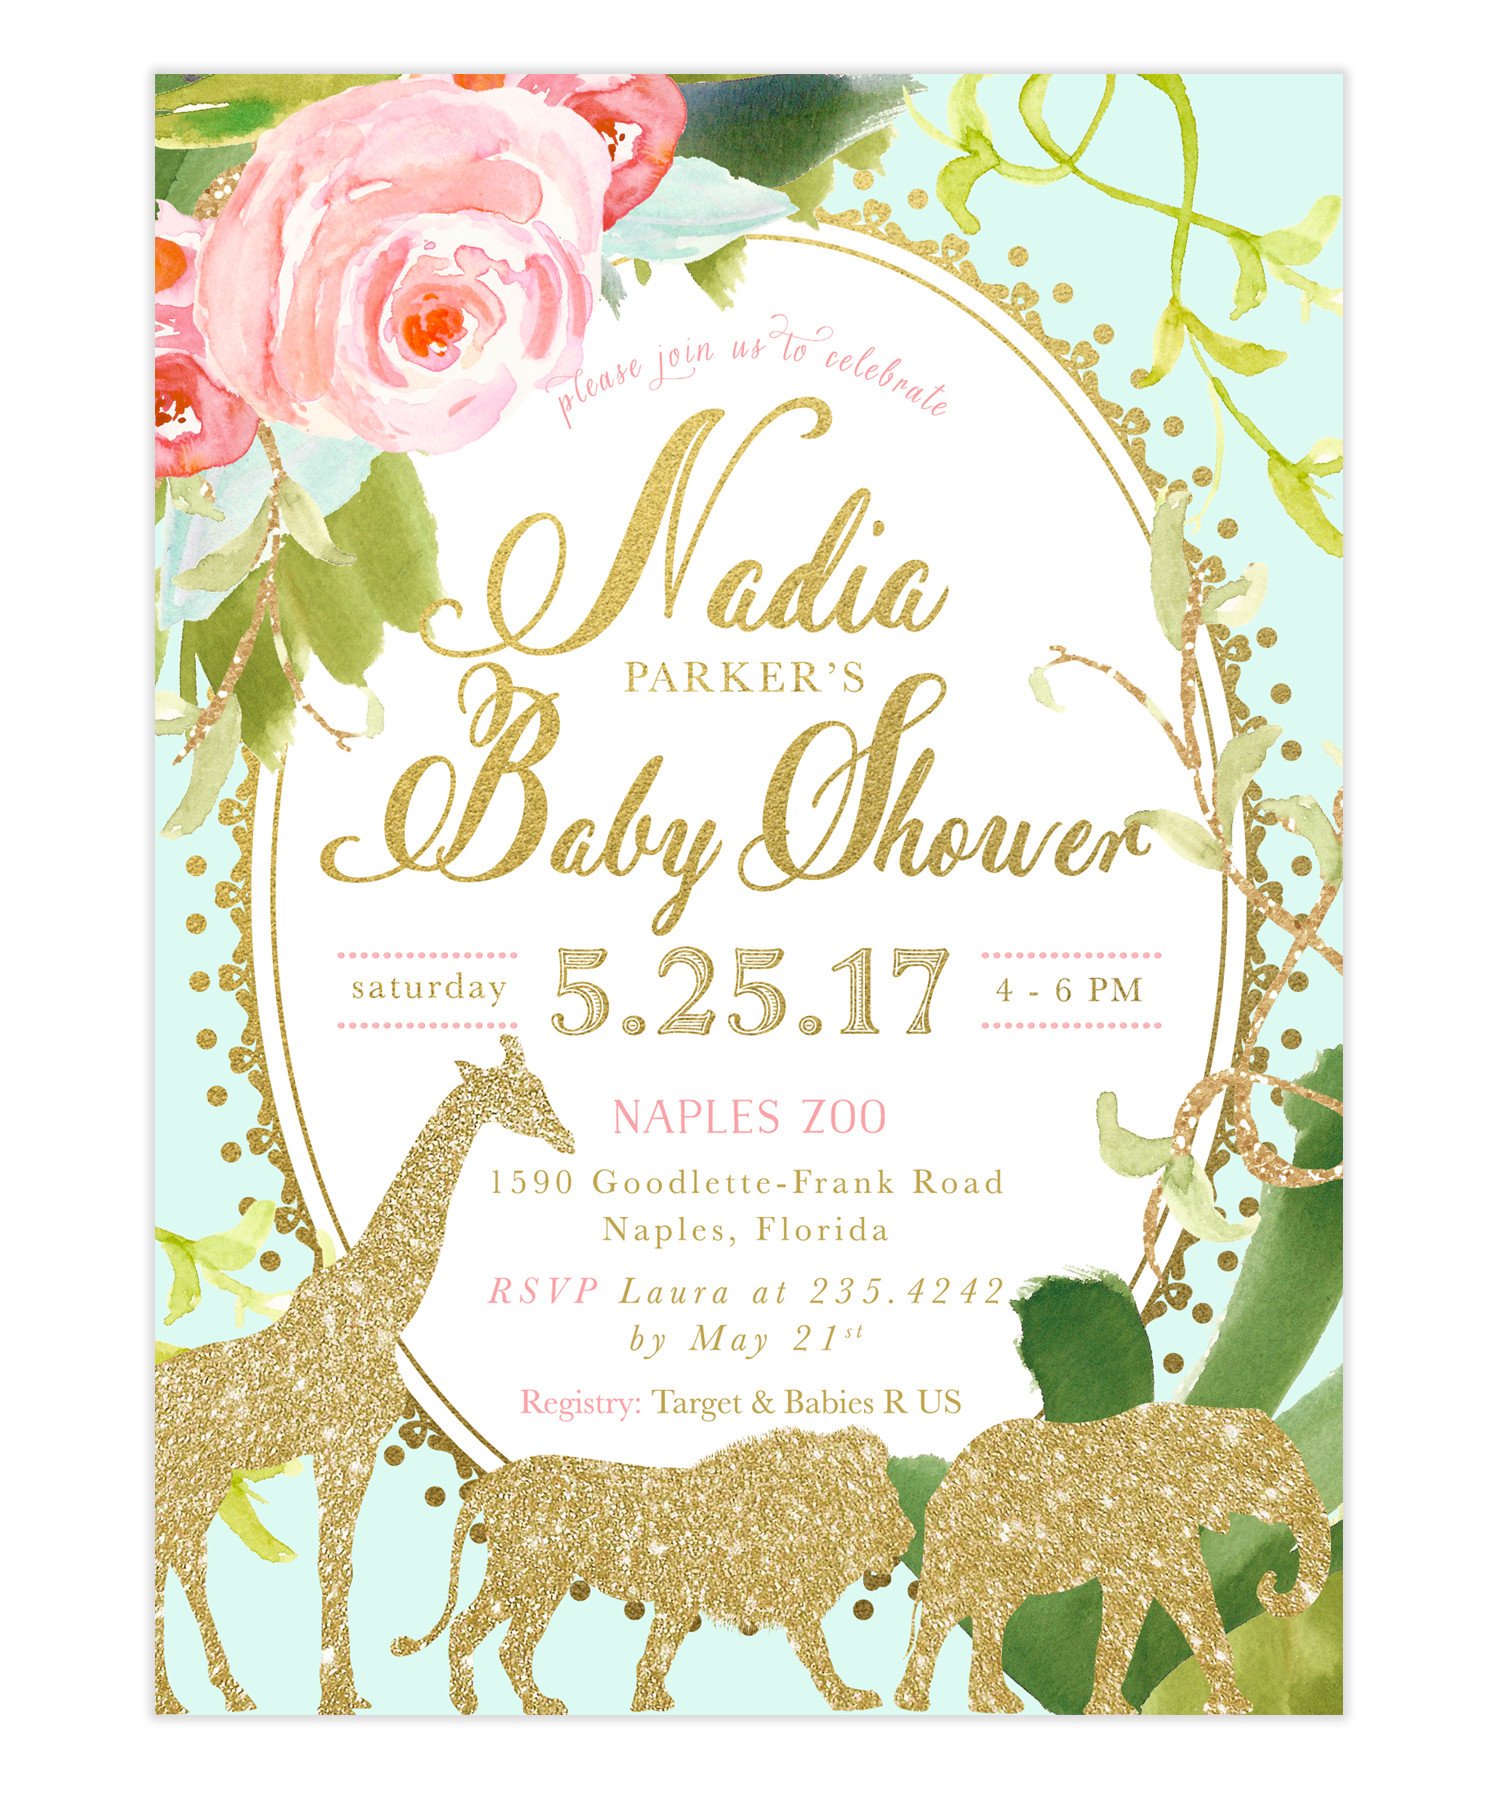 Full Size of Baby Shower:cheap Invitations Baby Shower Homemade Baby Shower Decorations Baby Shower Centerpiece Ideas For Boys Homemade Baby Shower Centerpieces Homemade Baby Shower Decorations Unique Baby Shower Themes Nautical Baby Shower Invitations For Boys Printable Baby Shower Invitations For Girl